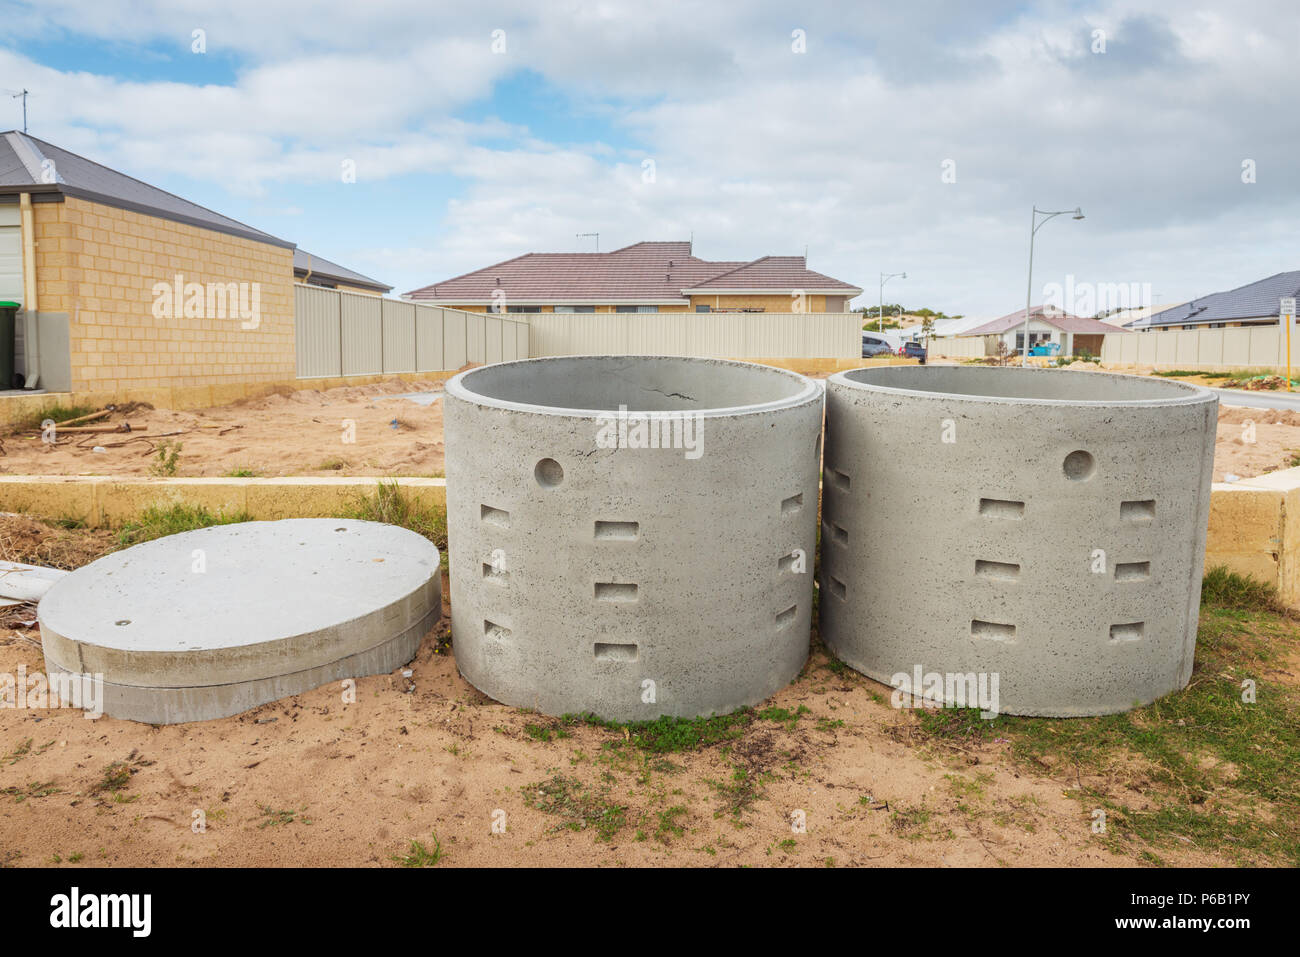 Two concrete soakwells with covers on the construction site before installation Stock Photo